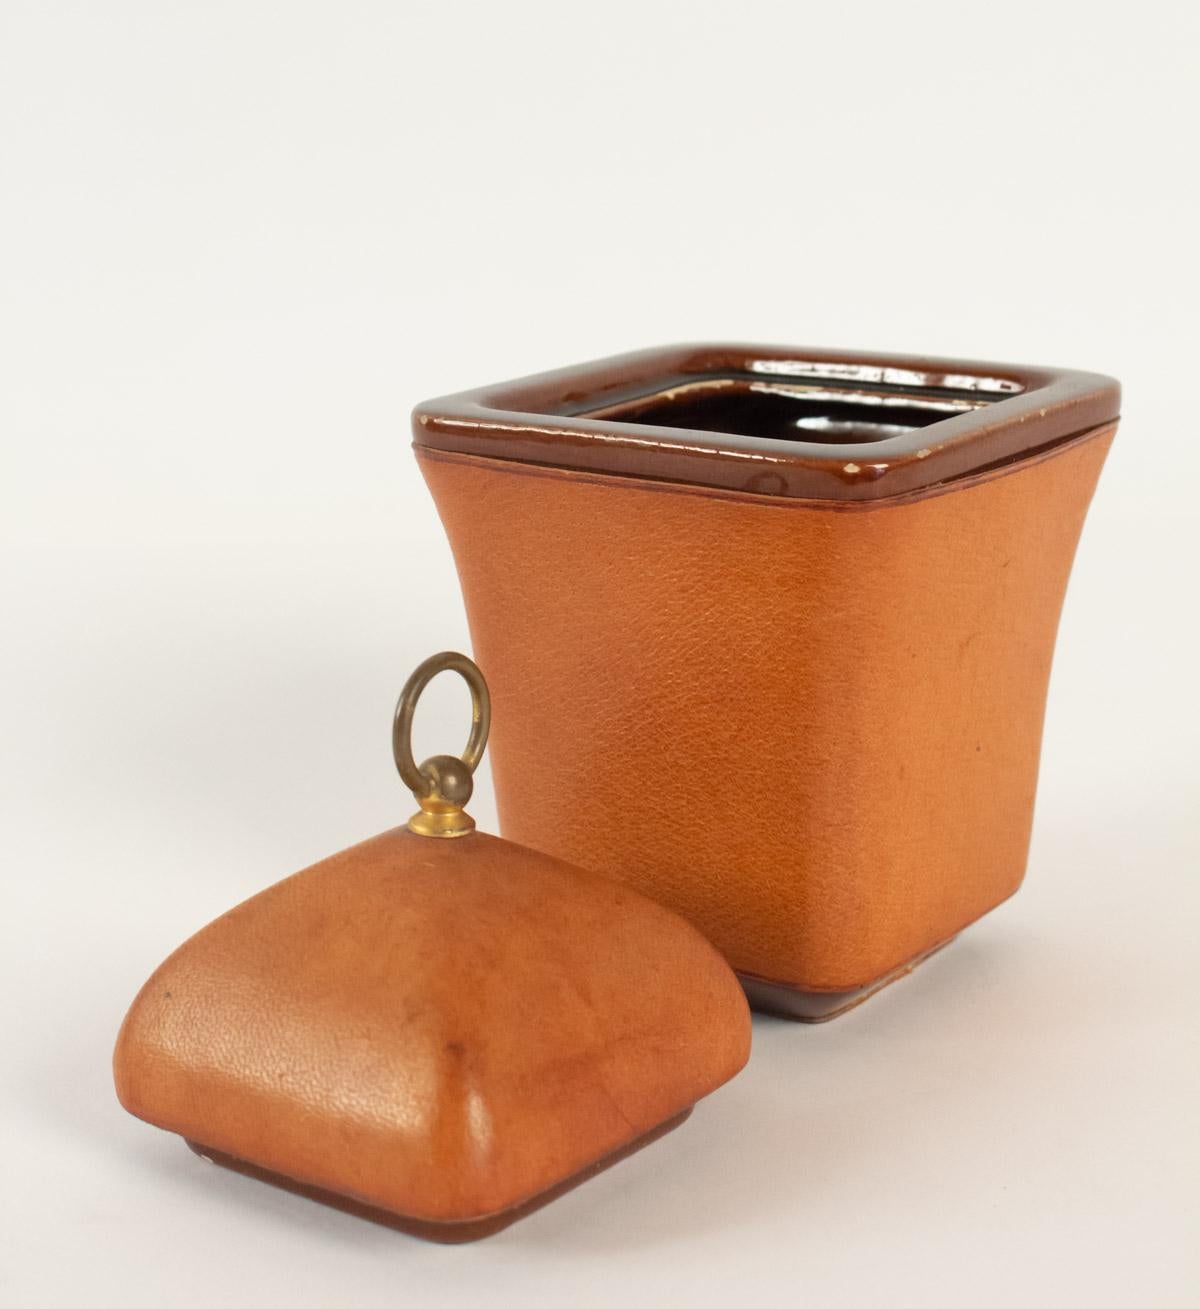 Modern Tobacco Pot, Leather Sheathed from the Maison Longchamp Brand in Paris